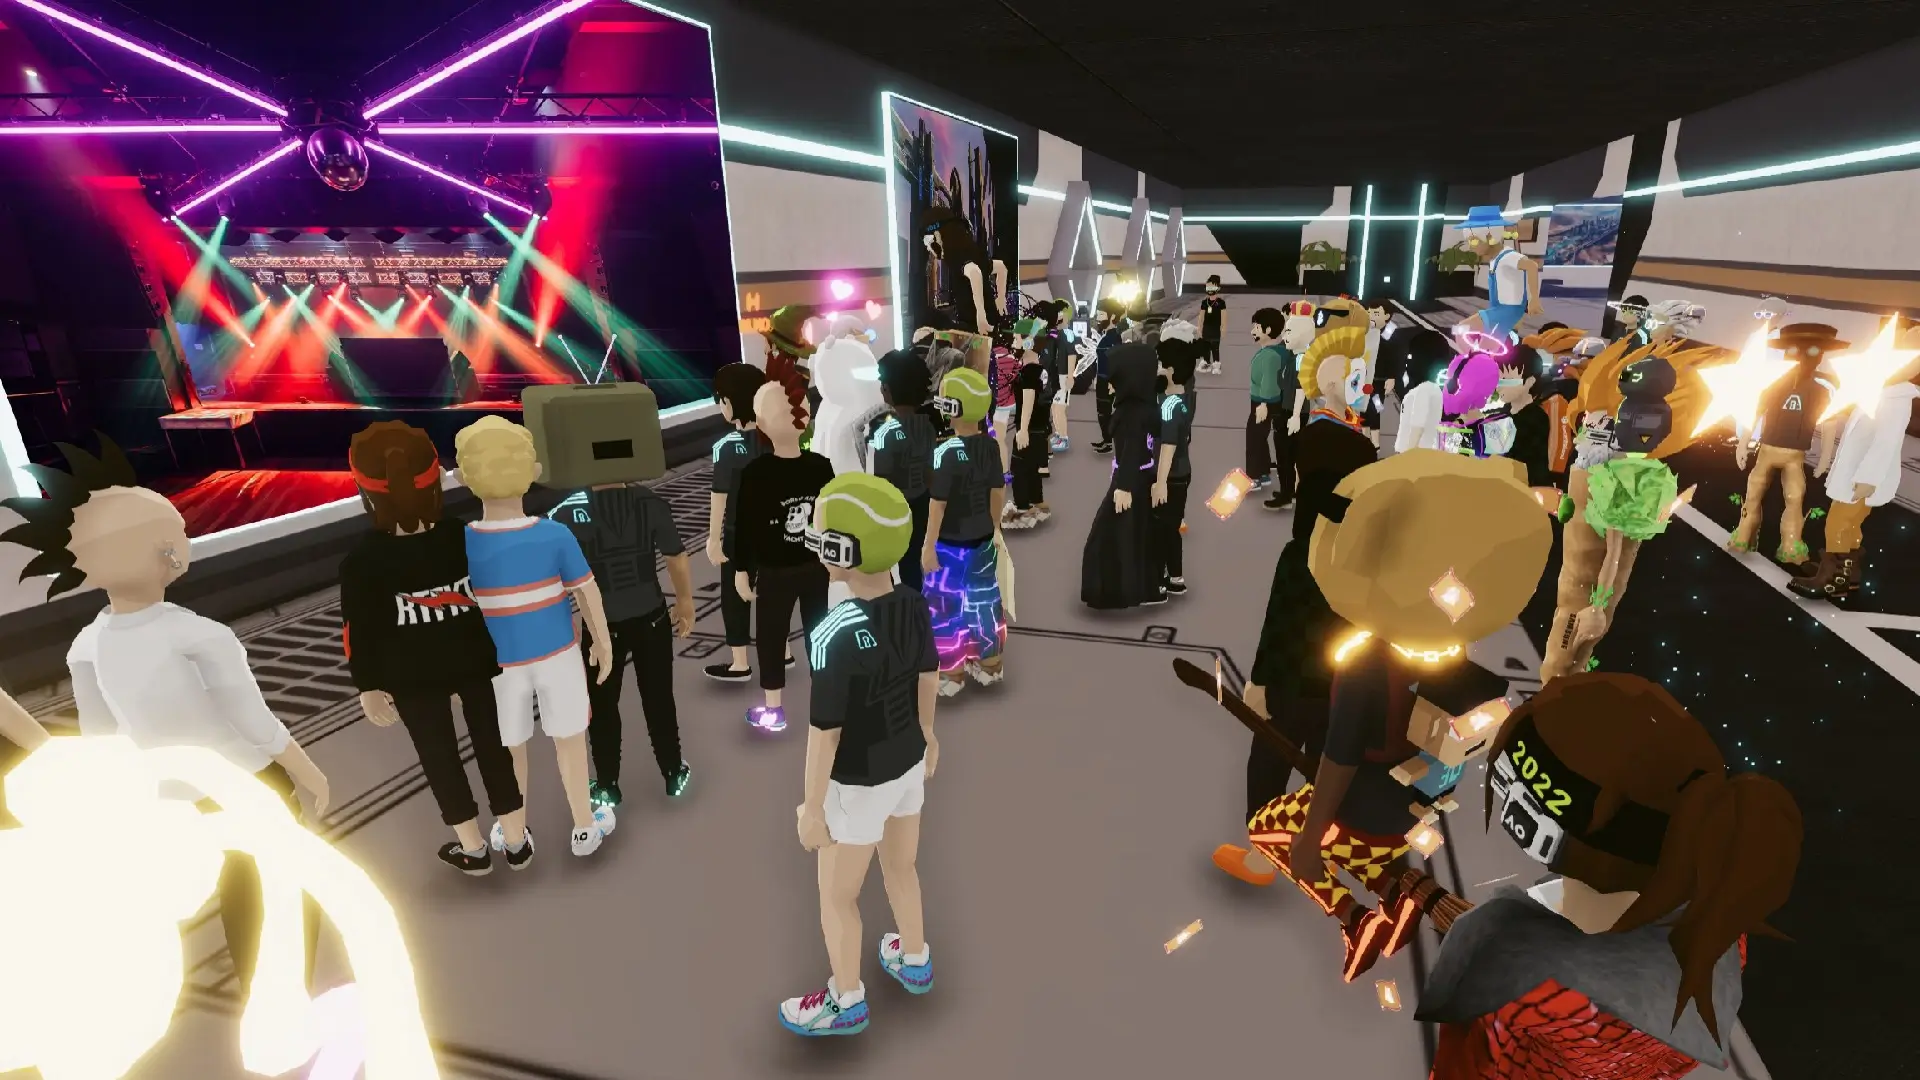 Many digital avatars observing fashion and art displays in the Decentraland metaverse fashion
                        conference.